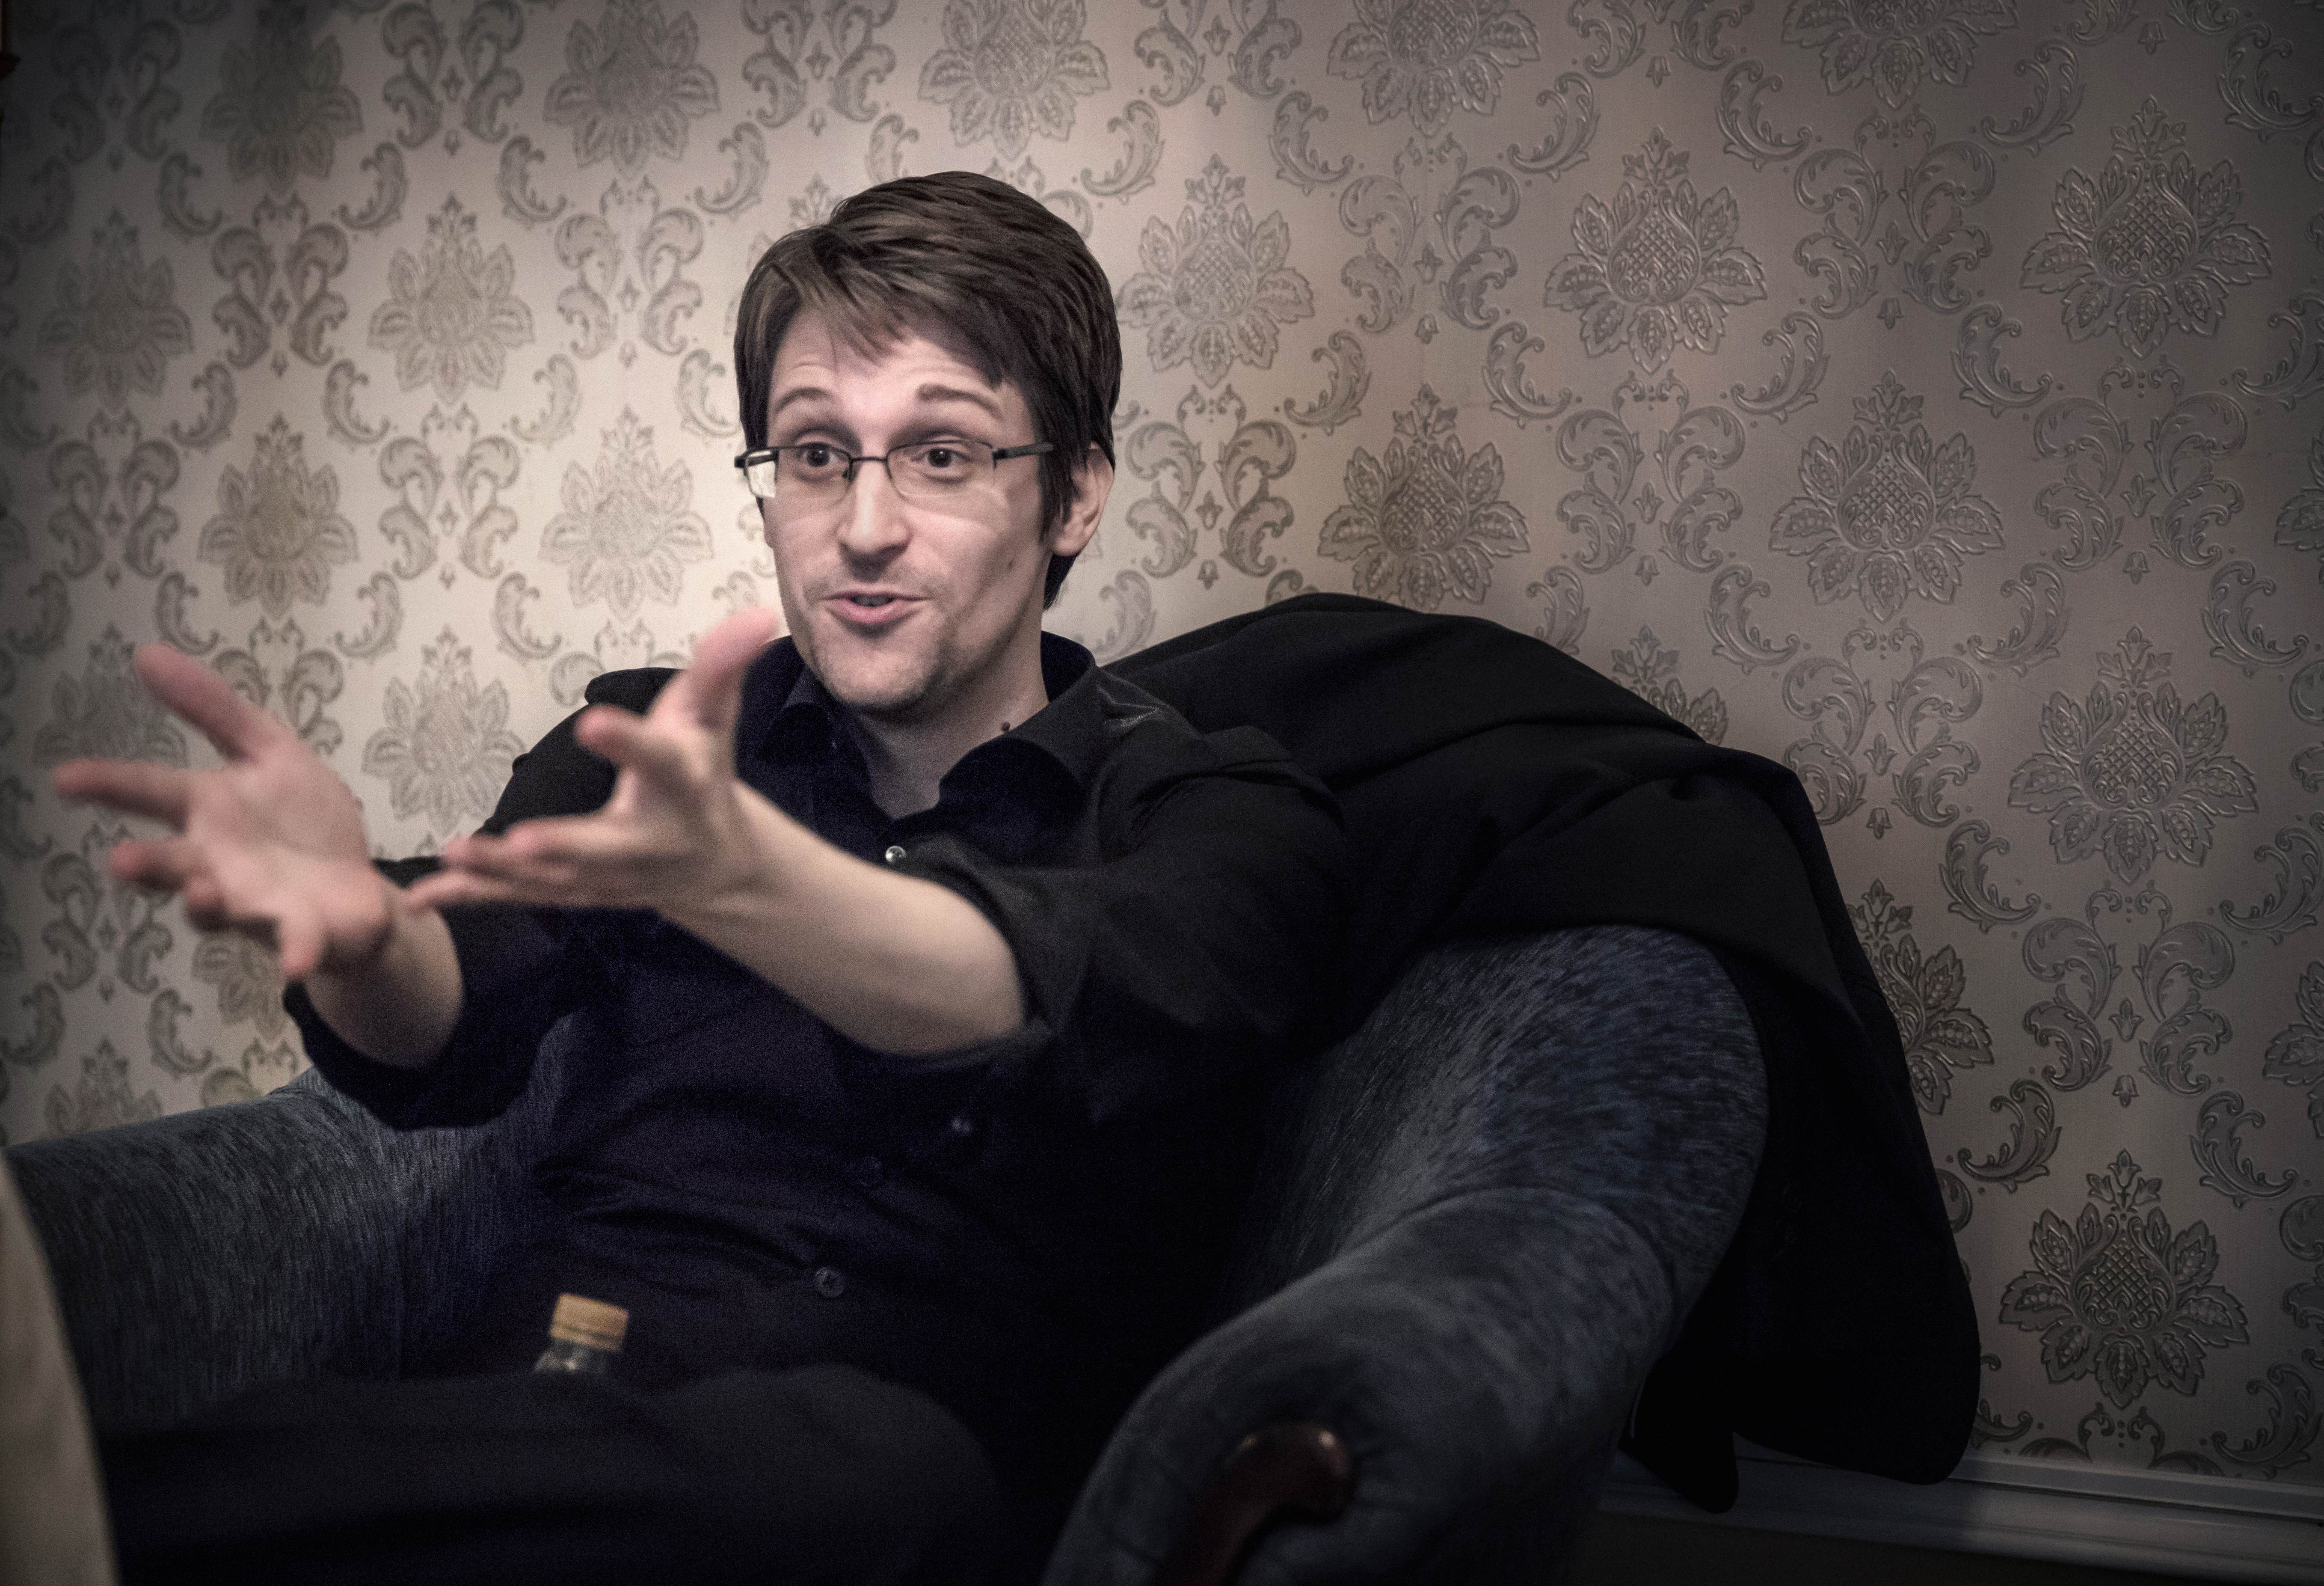 Edward Snowden during an interview with Swedish daily newspaper Dagens Nyheter. Photo: AFP